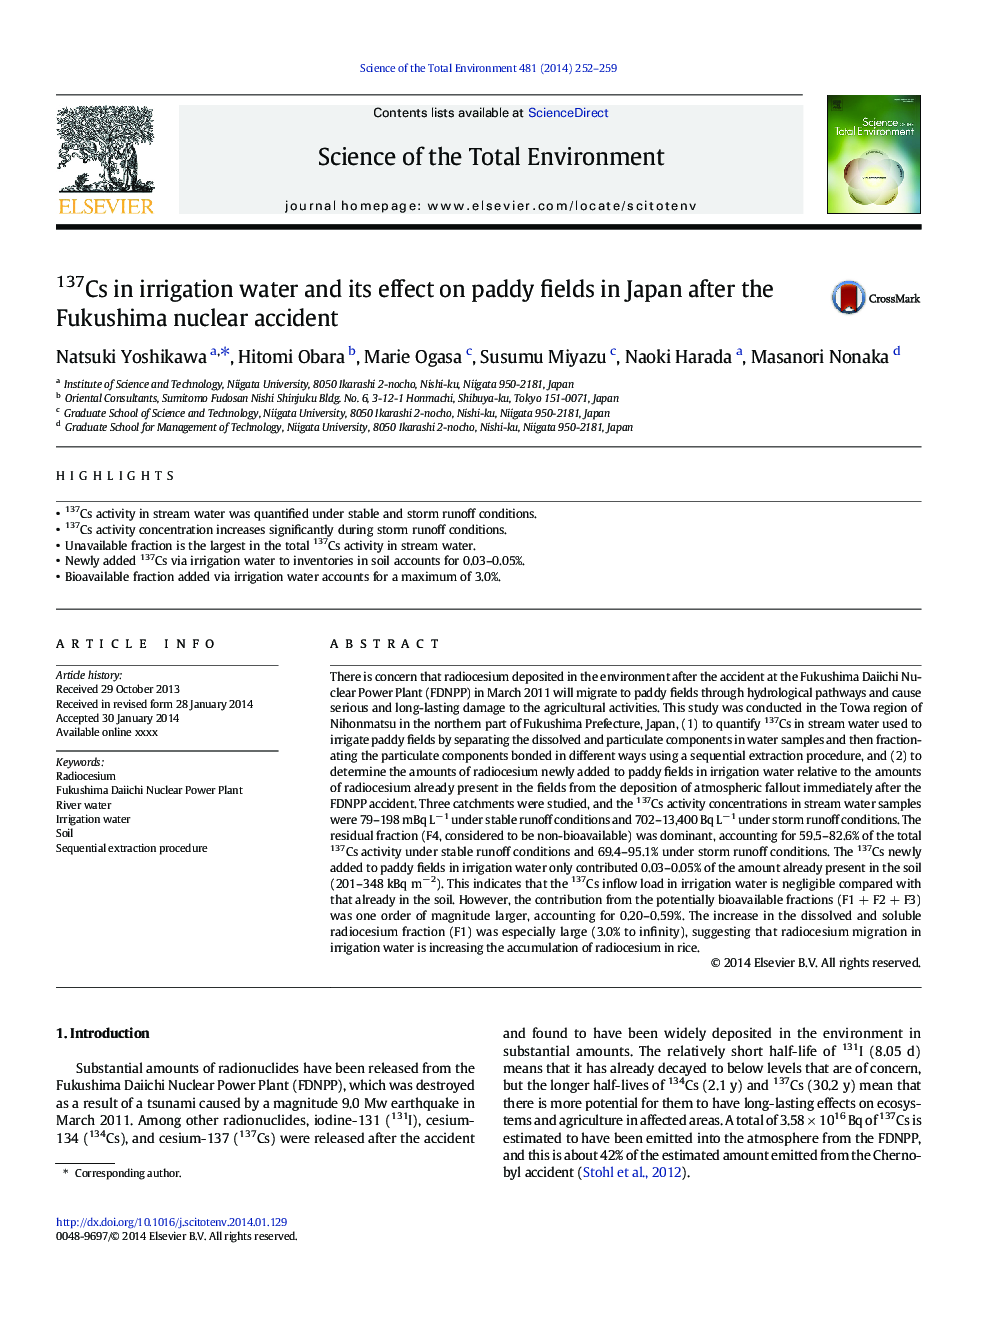 137Cs in irrigation water and its effect on paddy fields in Japan after the Fukushima nuclear accident